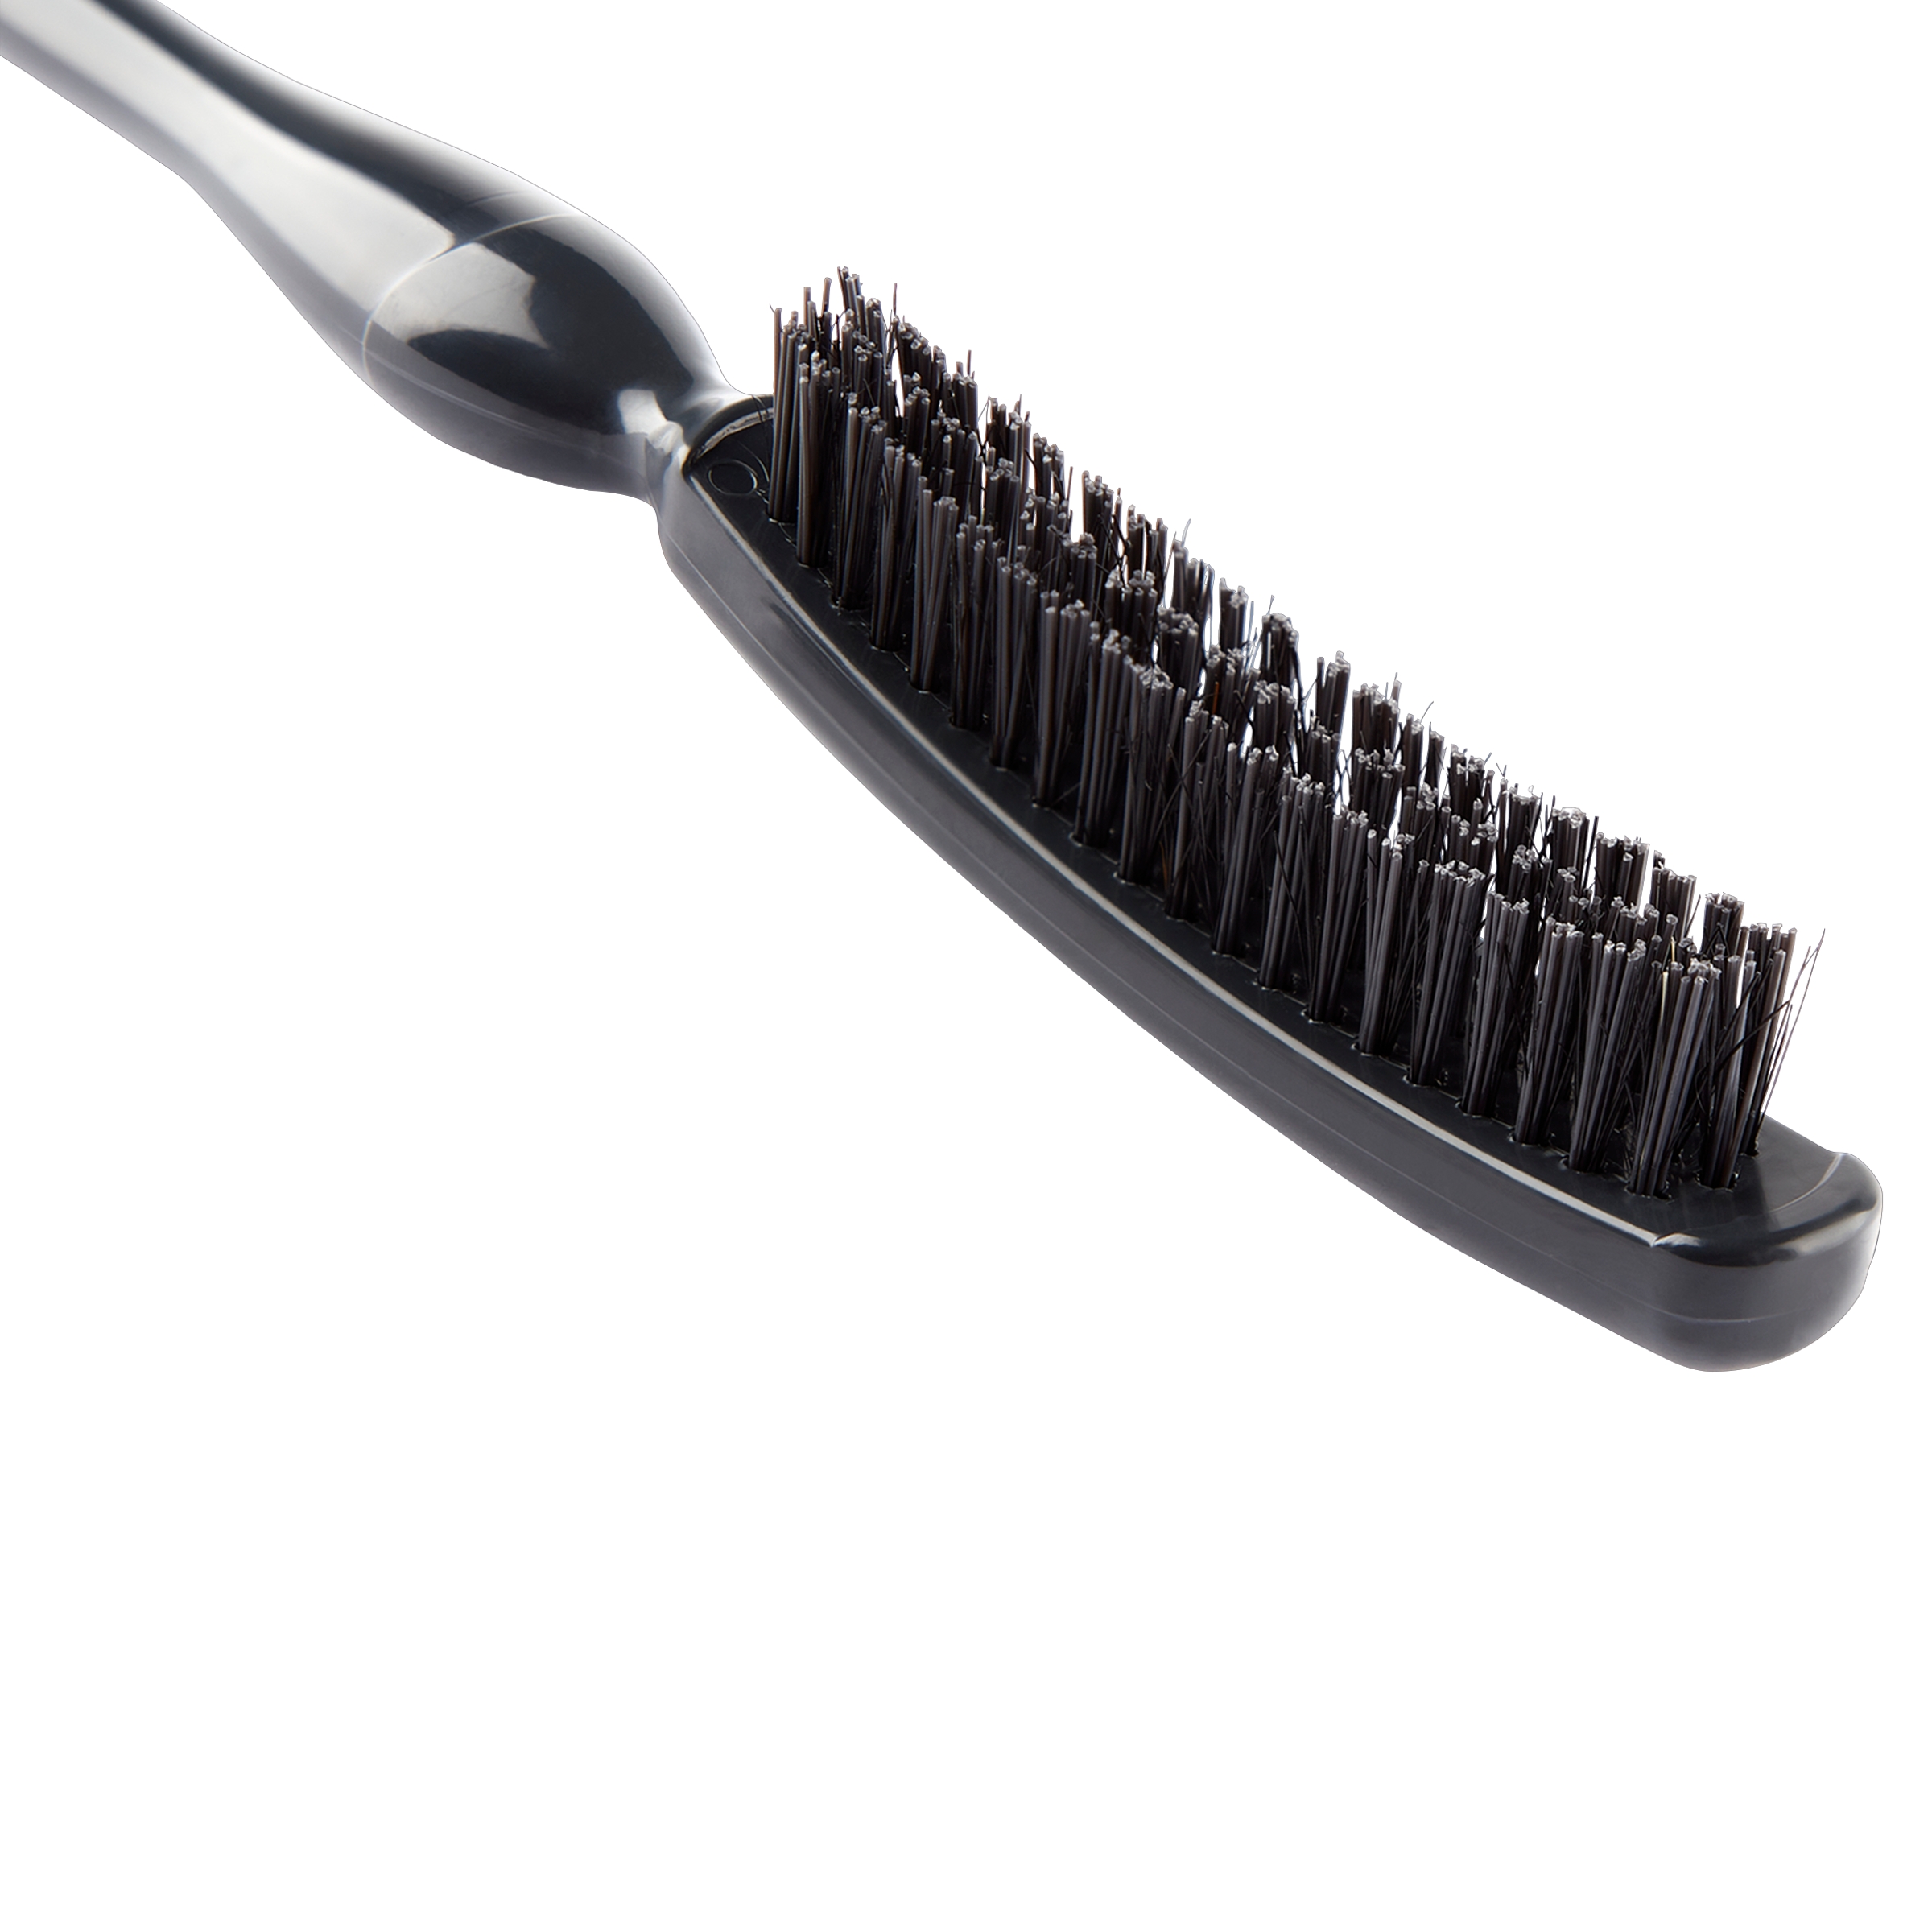 Goody® Volume Boost Teasing Comb and Boar Bristle Brush Kit, 2 CT - image 4 of 7